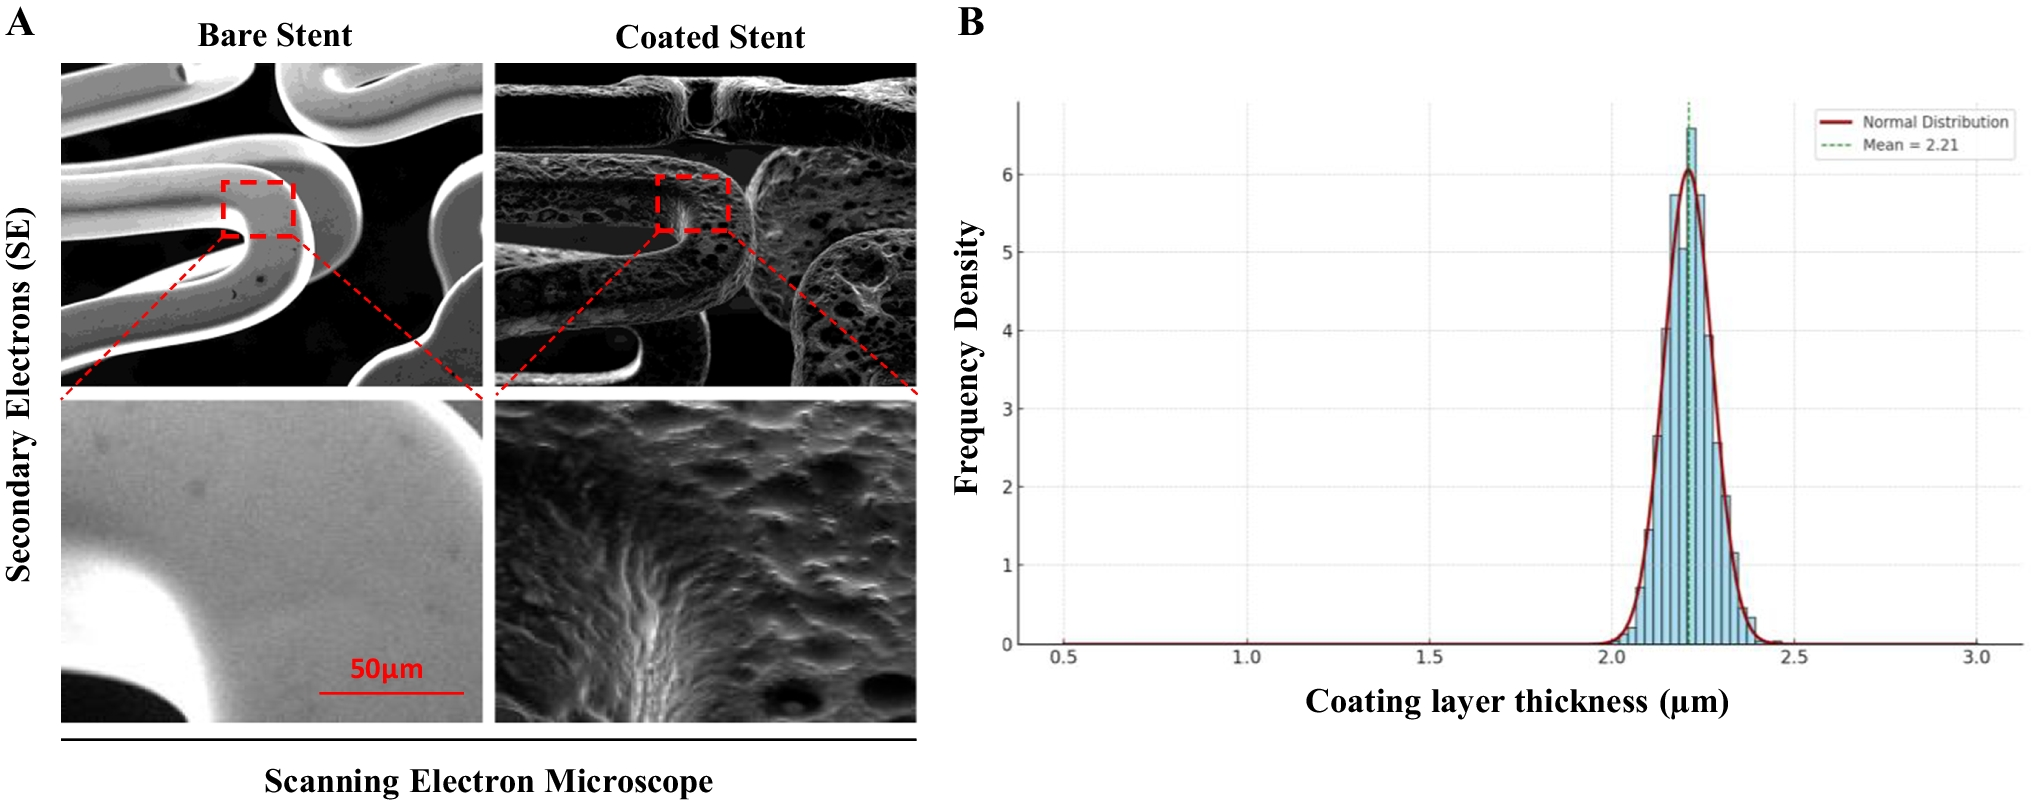 Enhanced Reendothelialization and Thrombosis Prevention with a New Drug-Eluting Stent